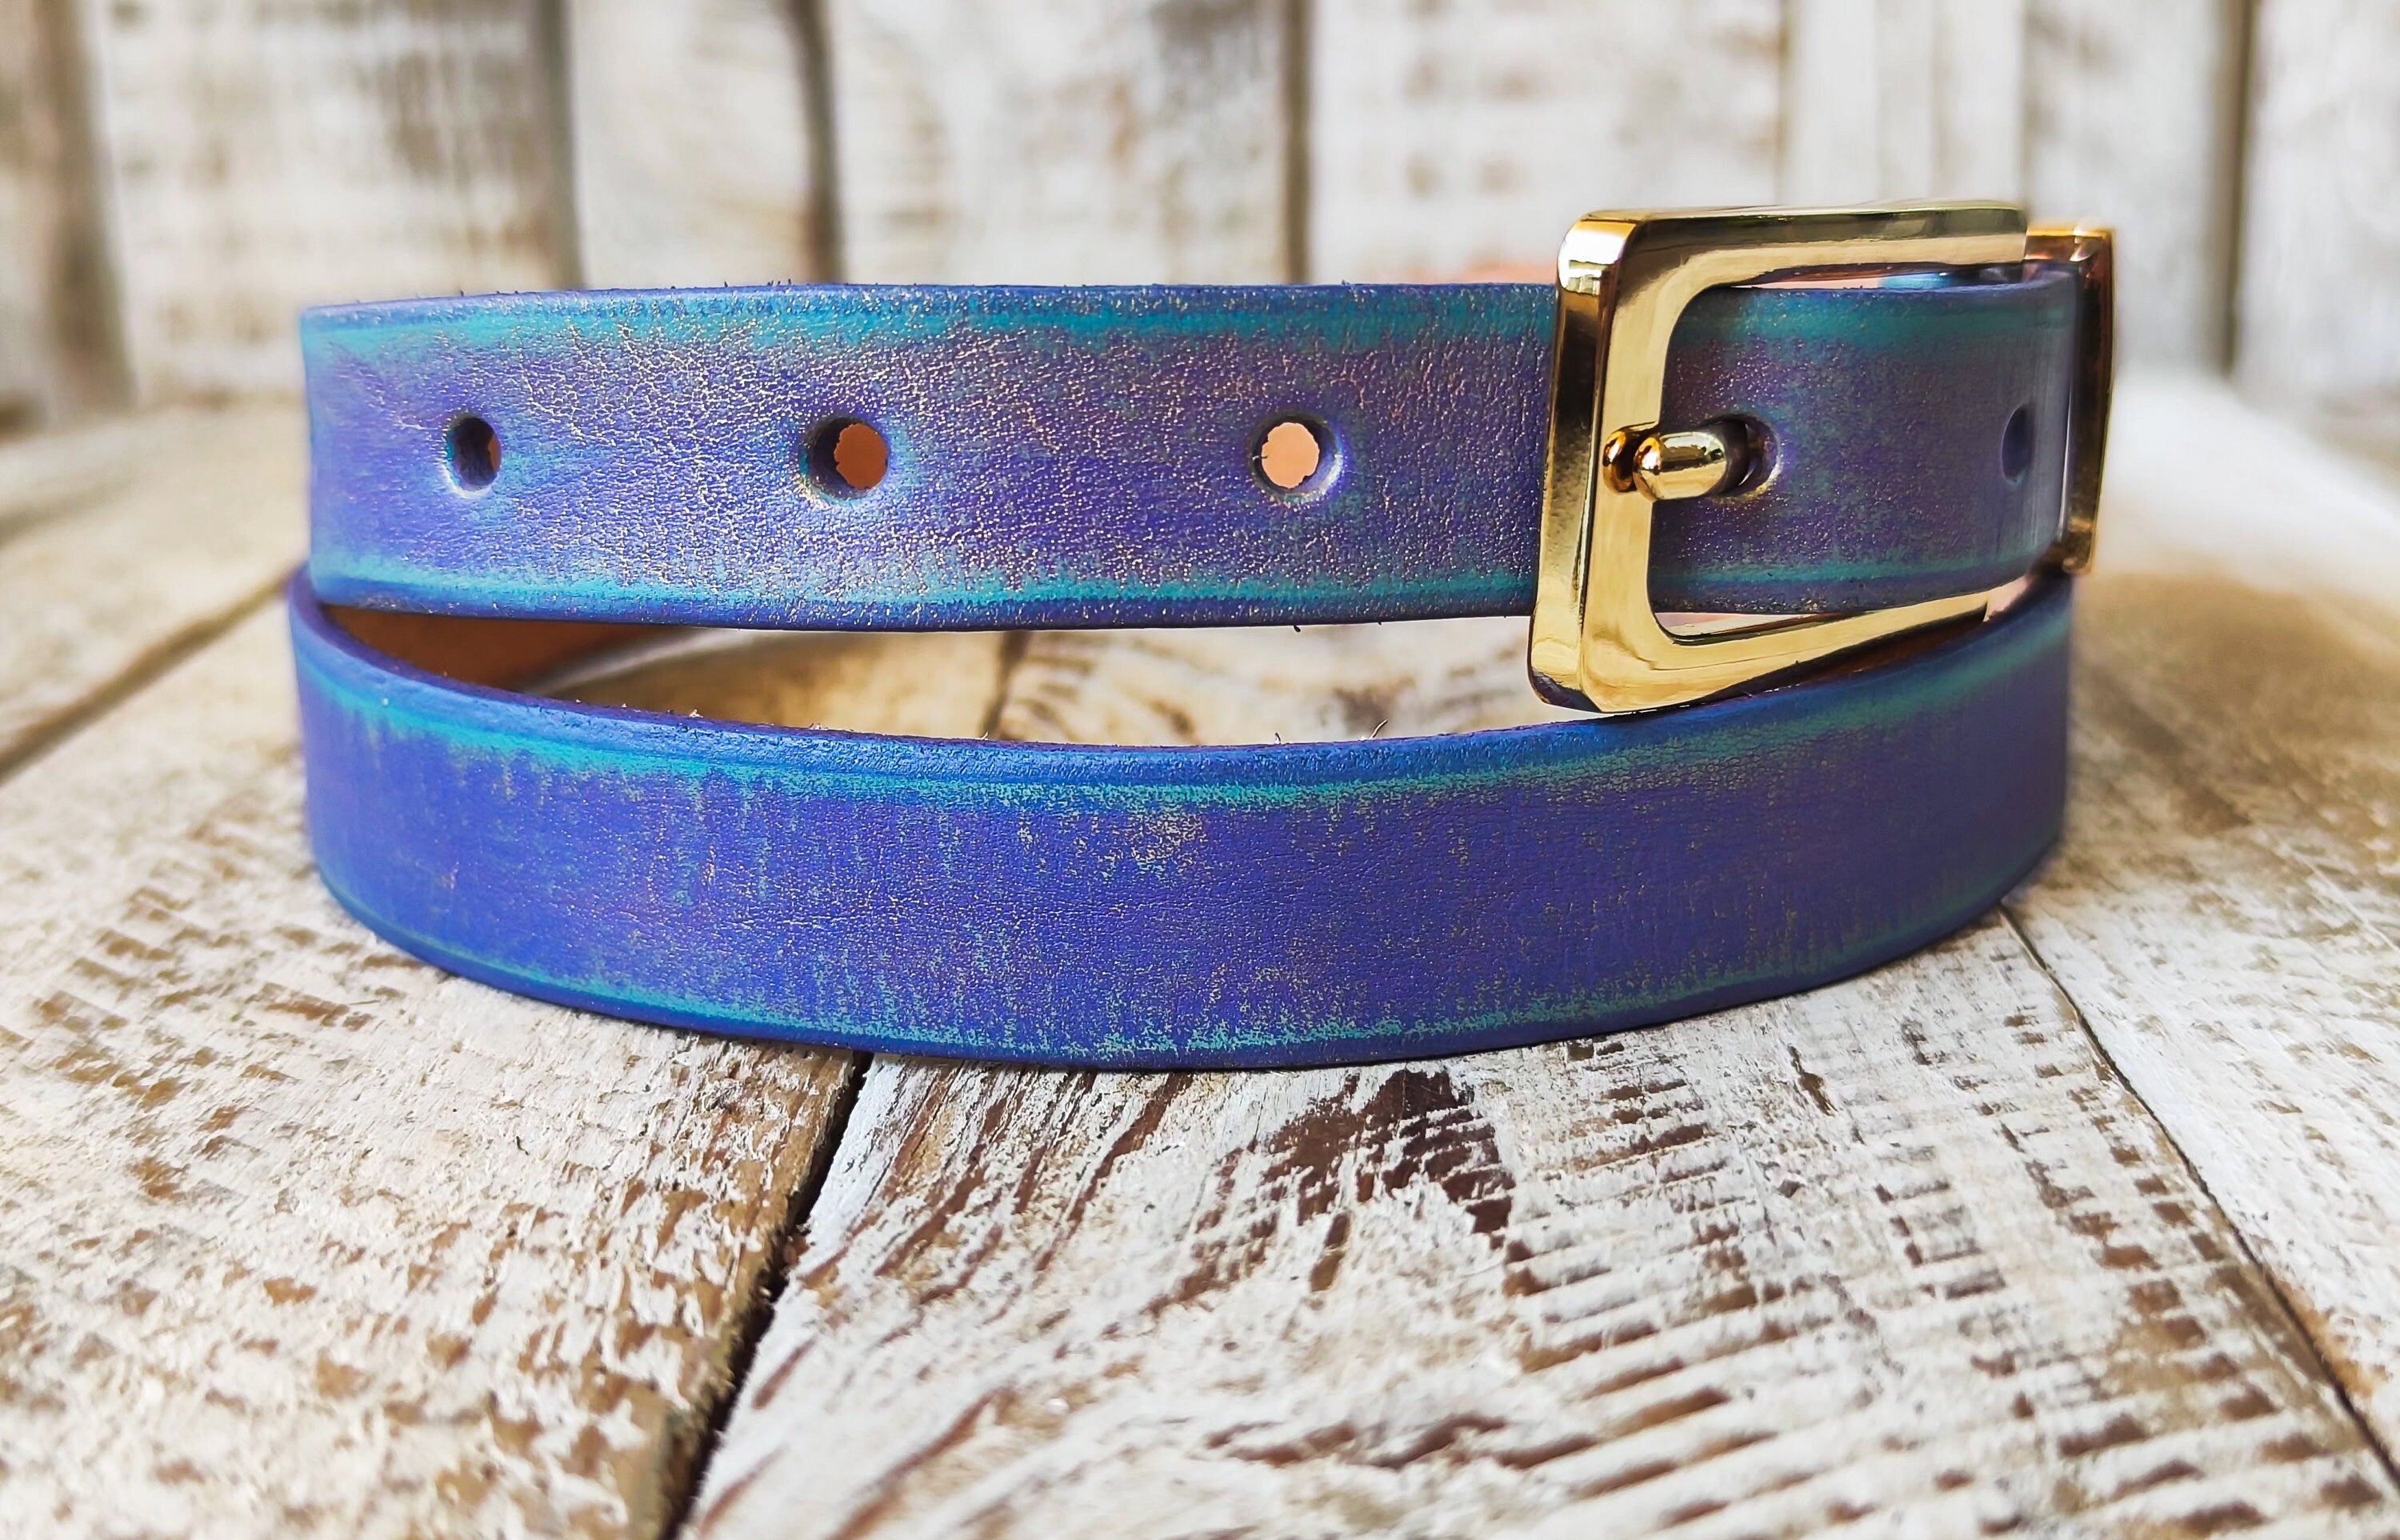 Handcrafted Narrow 2cm purple Leather Belt with turquoise wash and golden finish attaches to  Gold Buckle for Women, Elegant design